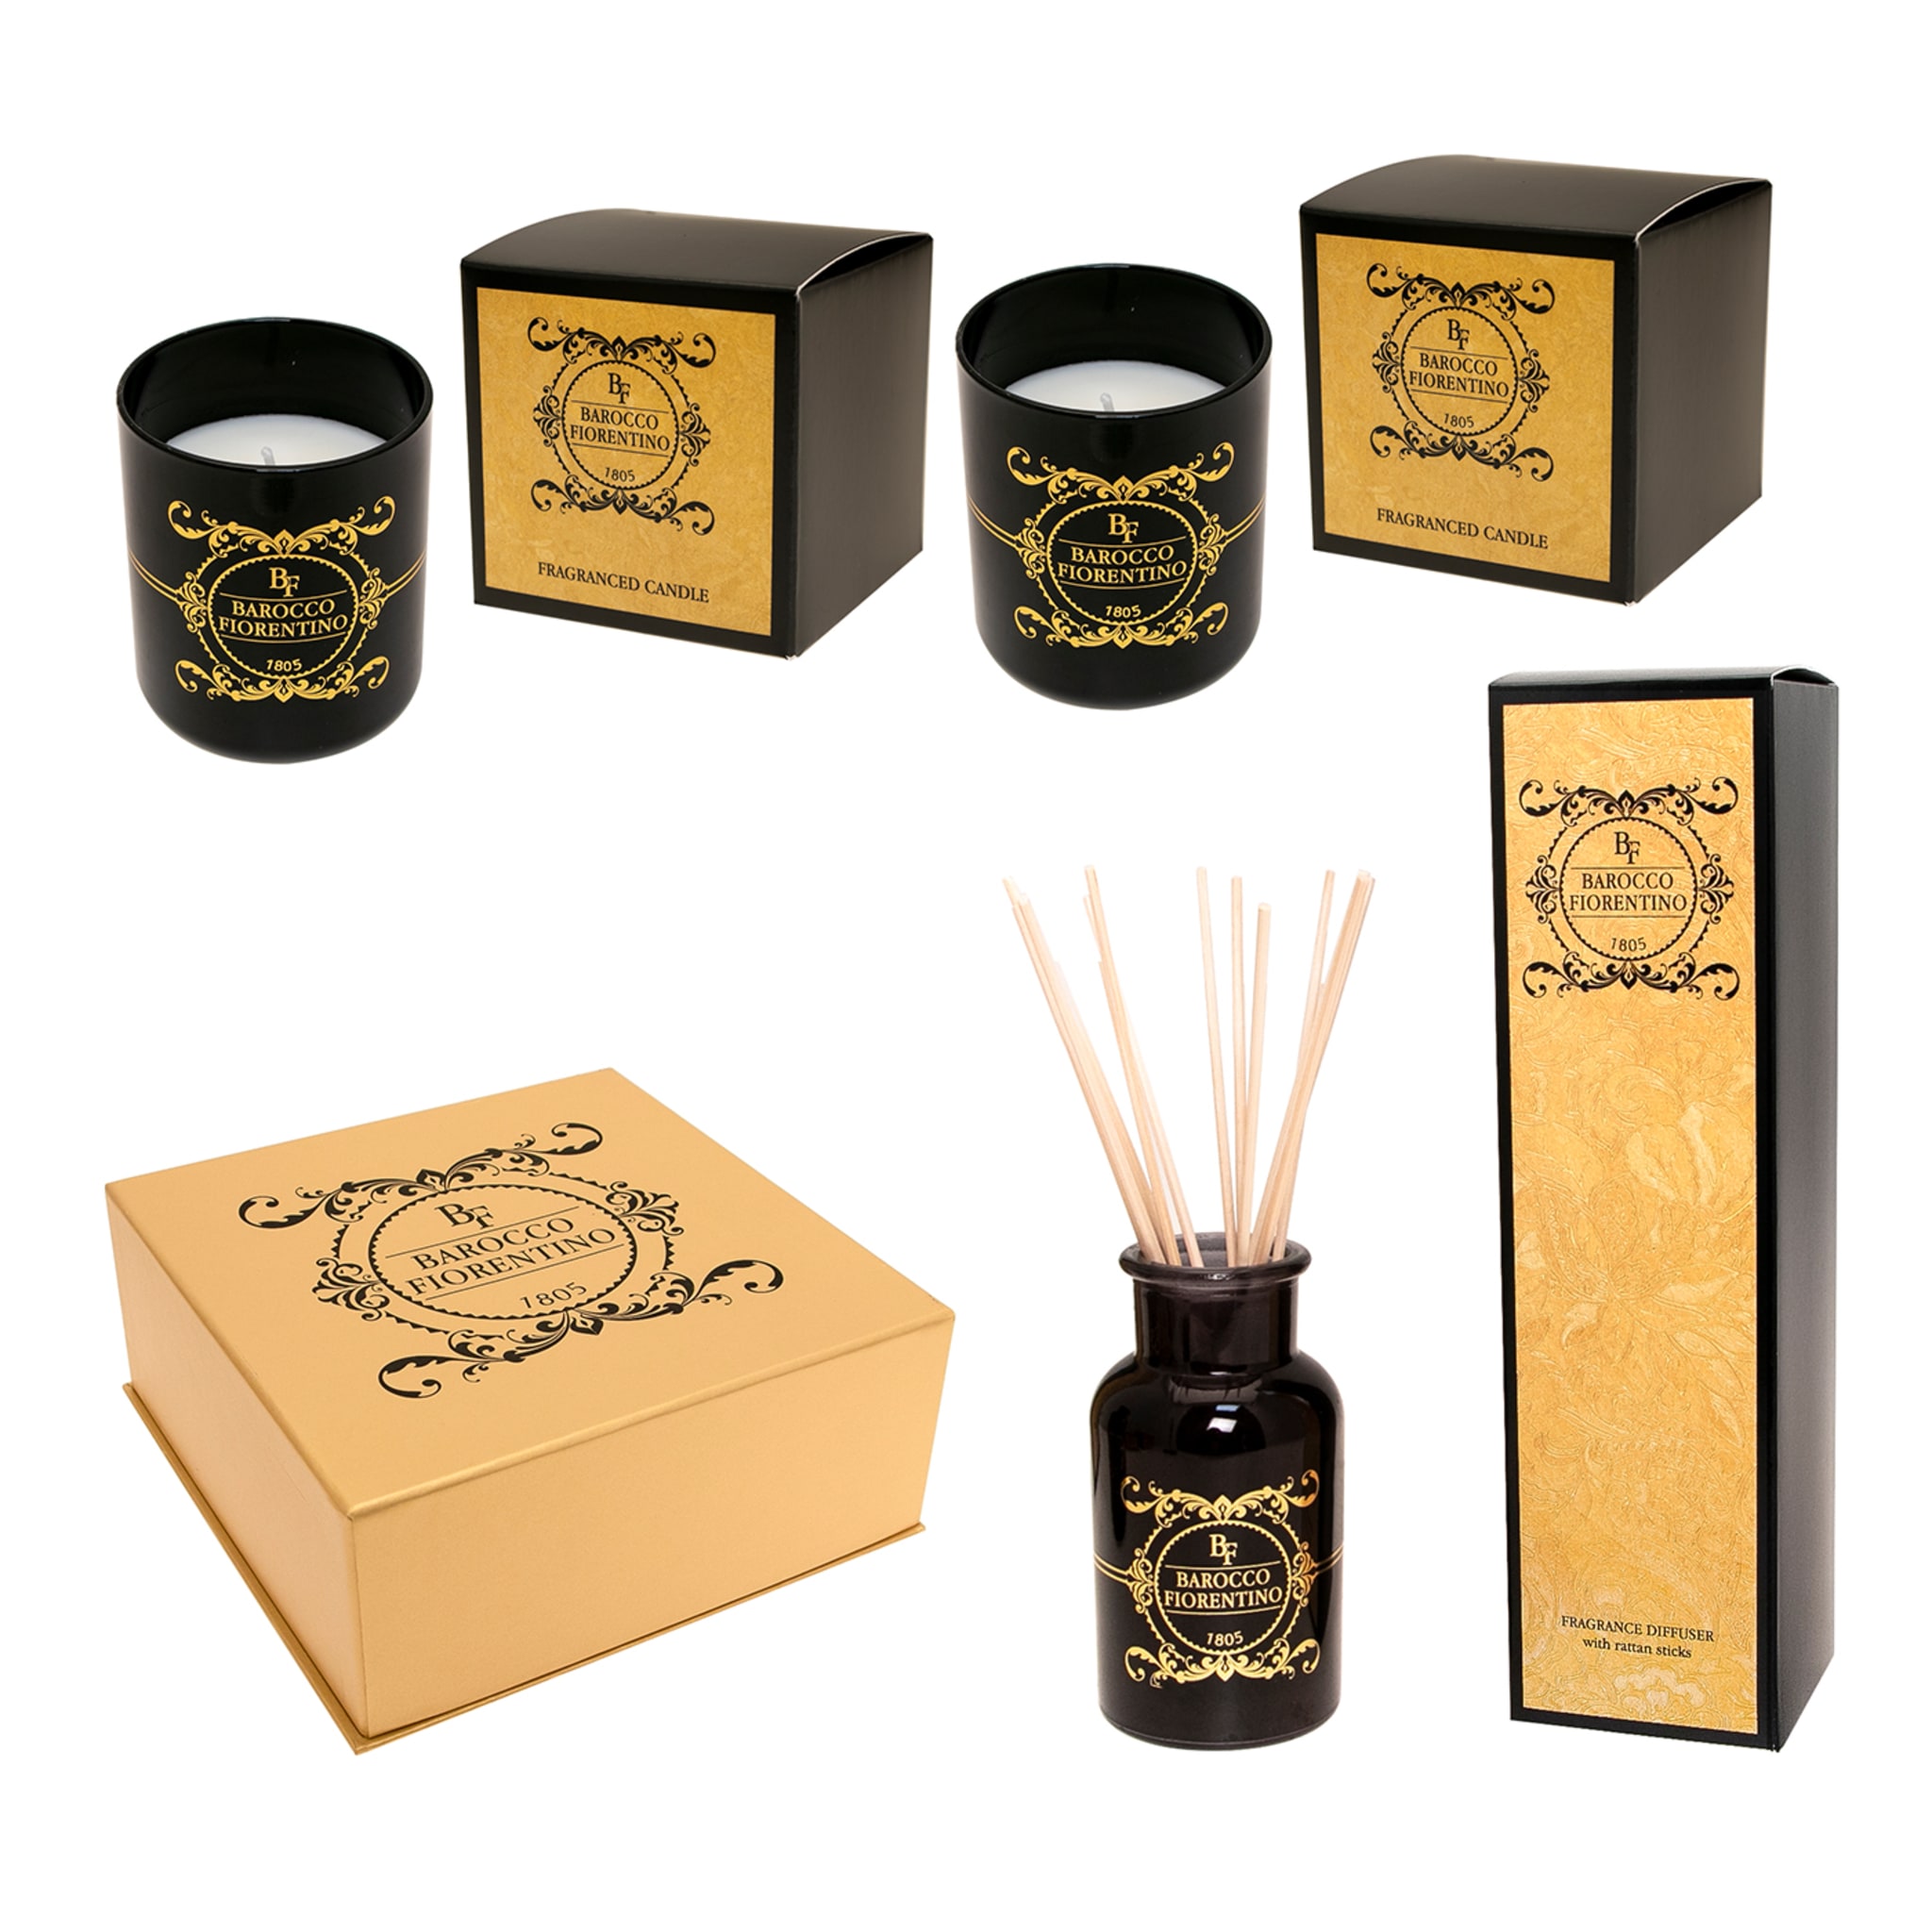 Barocco Fiorentino Set of 2 Candles and 1 Fragrance Diffuser - Main view